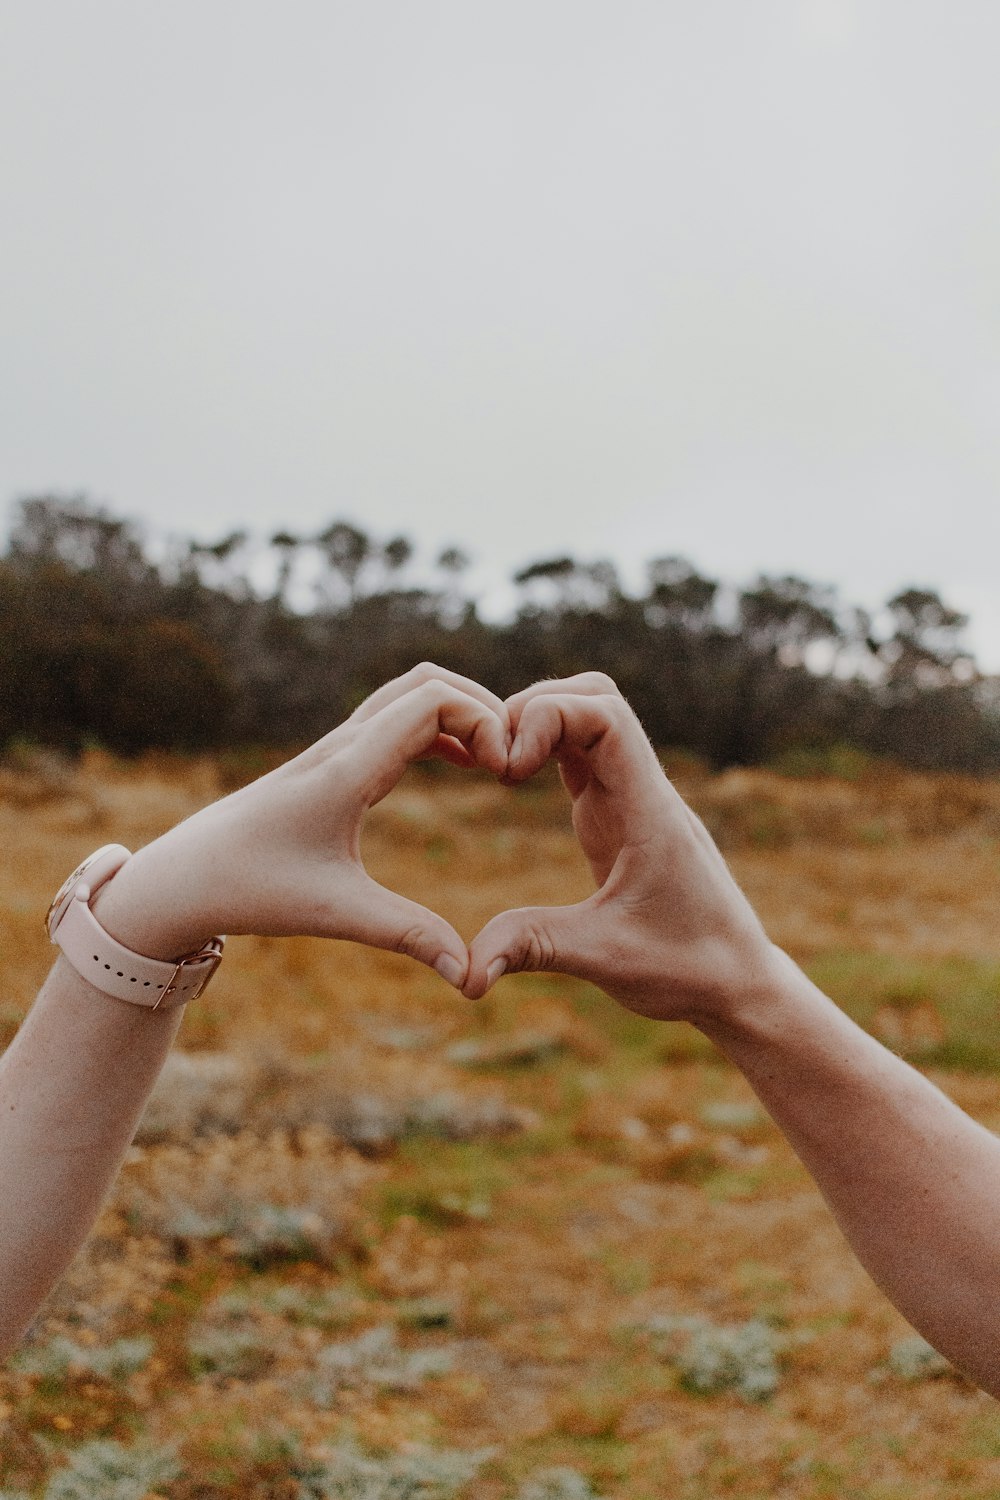 750+ Heart Hand Pictures [HQ] | Download Free Images on Unsplash